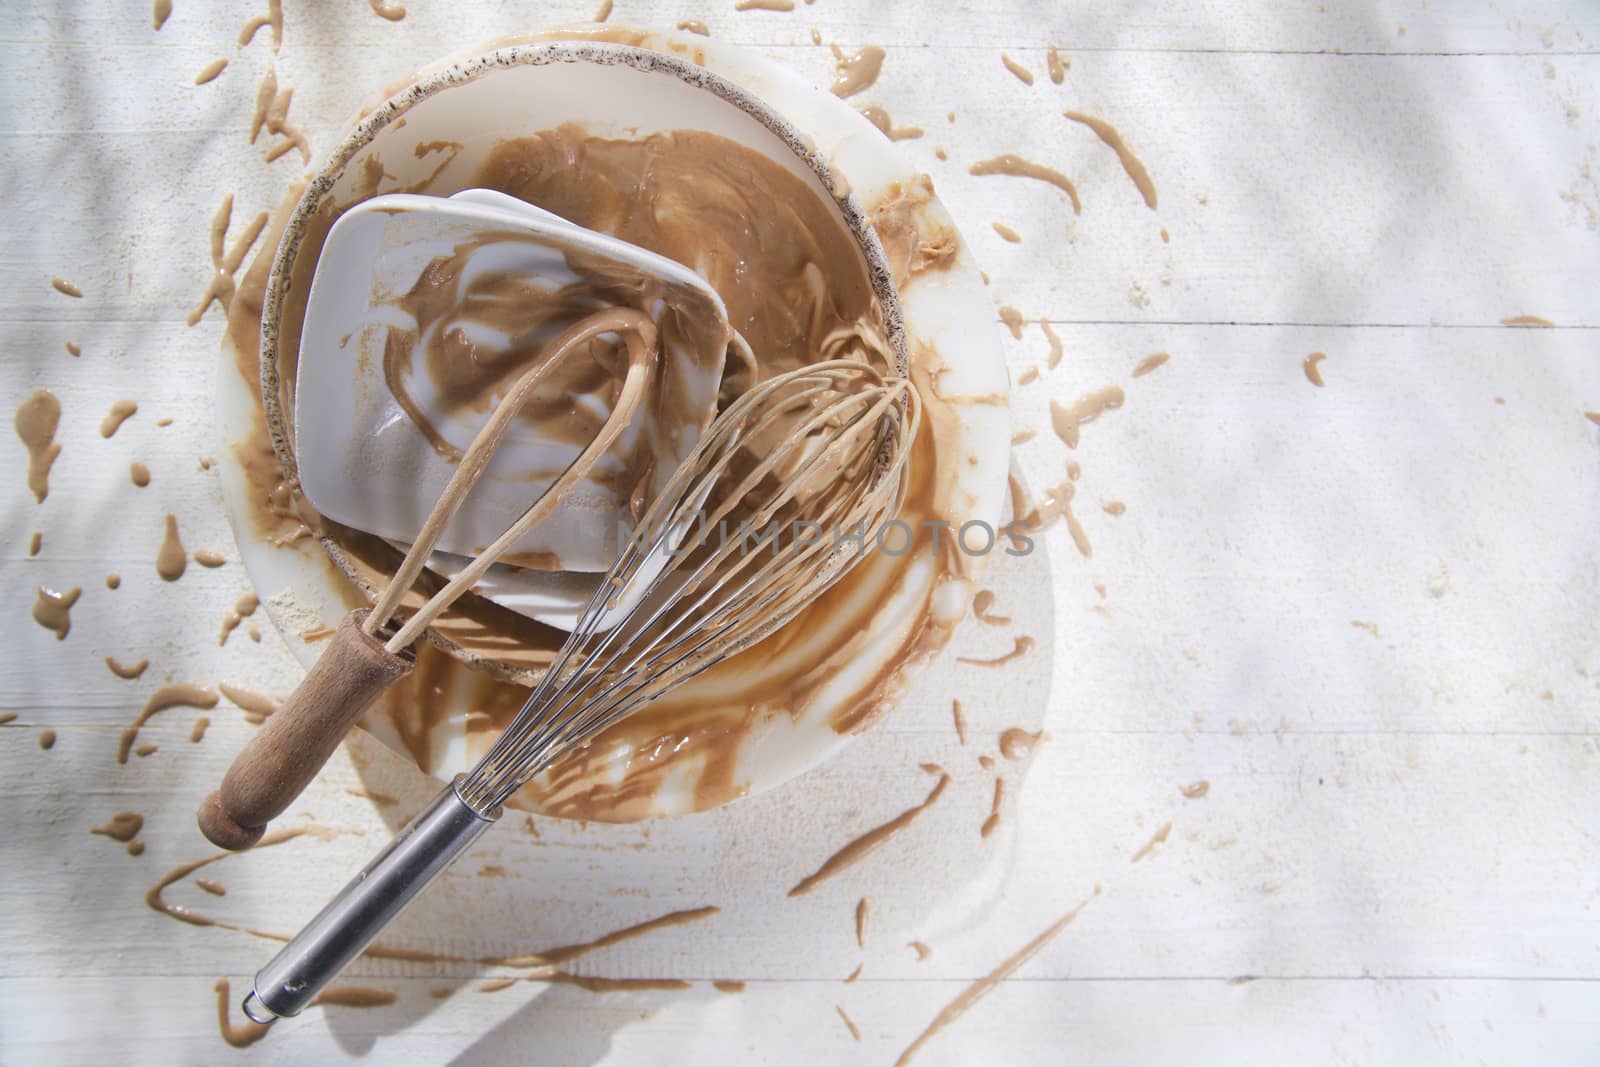 Whip and after preparation of sweet dishes by fotografiche.eu